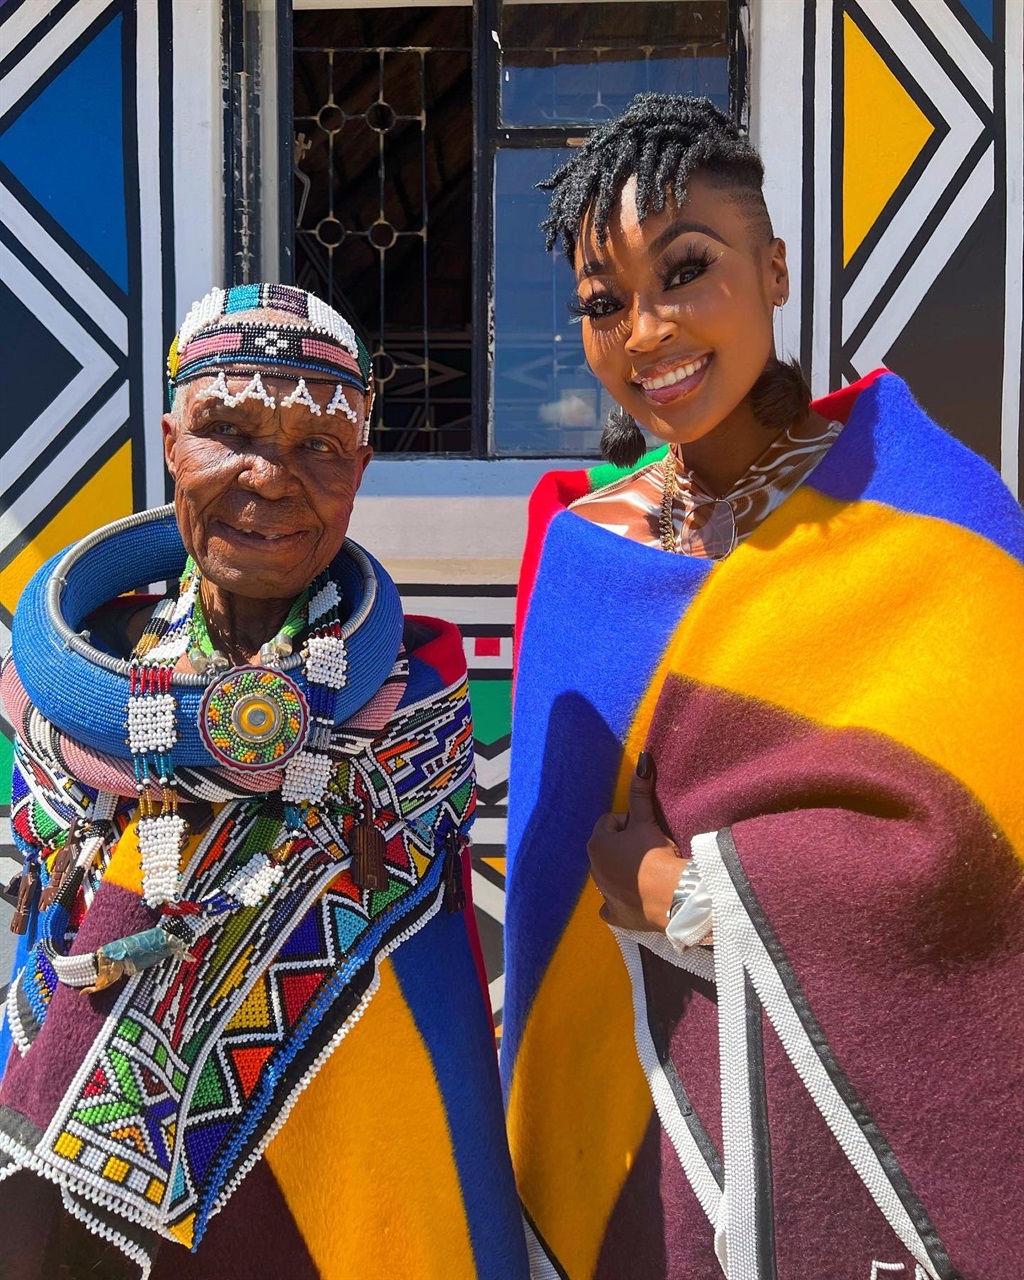 Dr Esther Mahlangu and Lamiez Holworthy. Photo from Twitter.